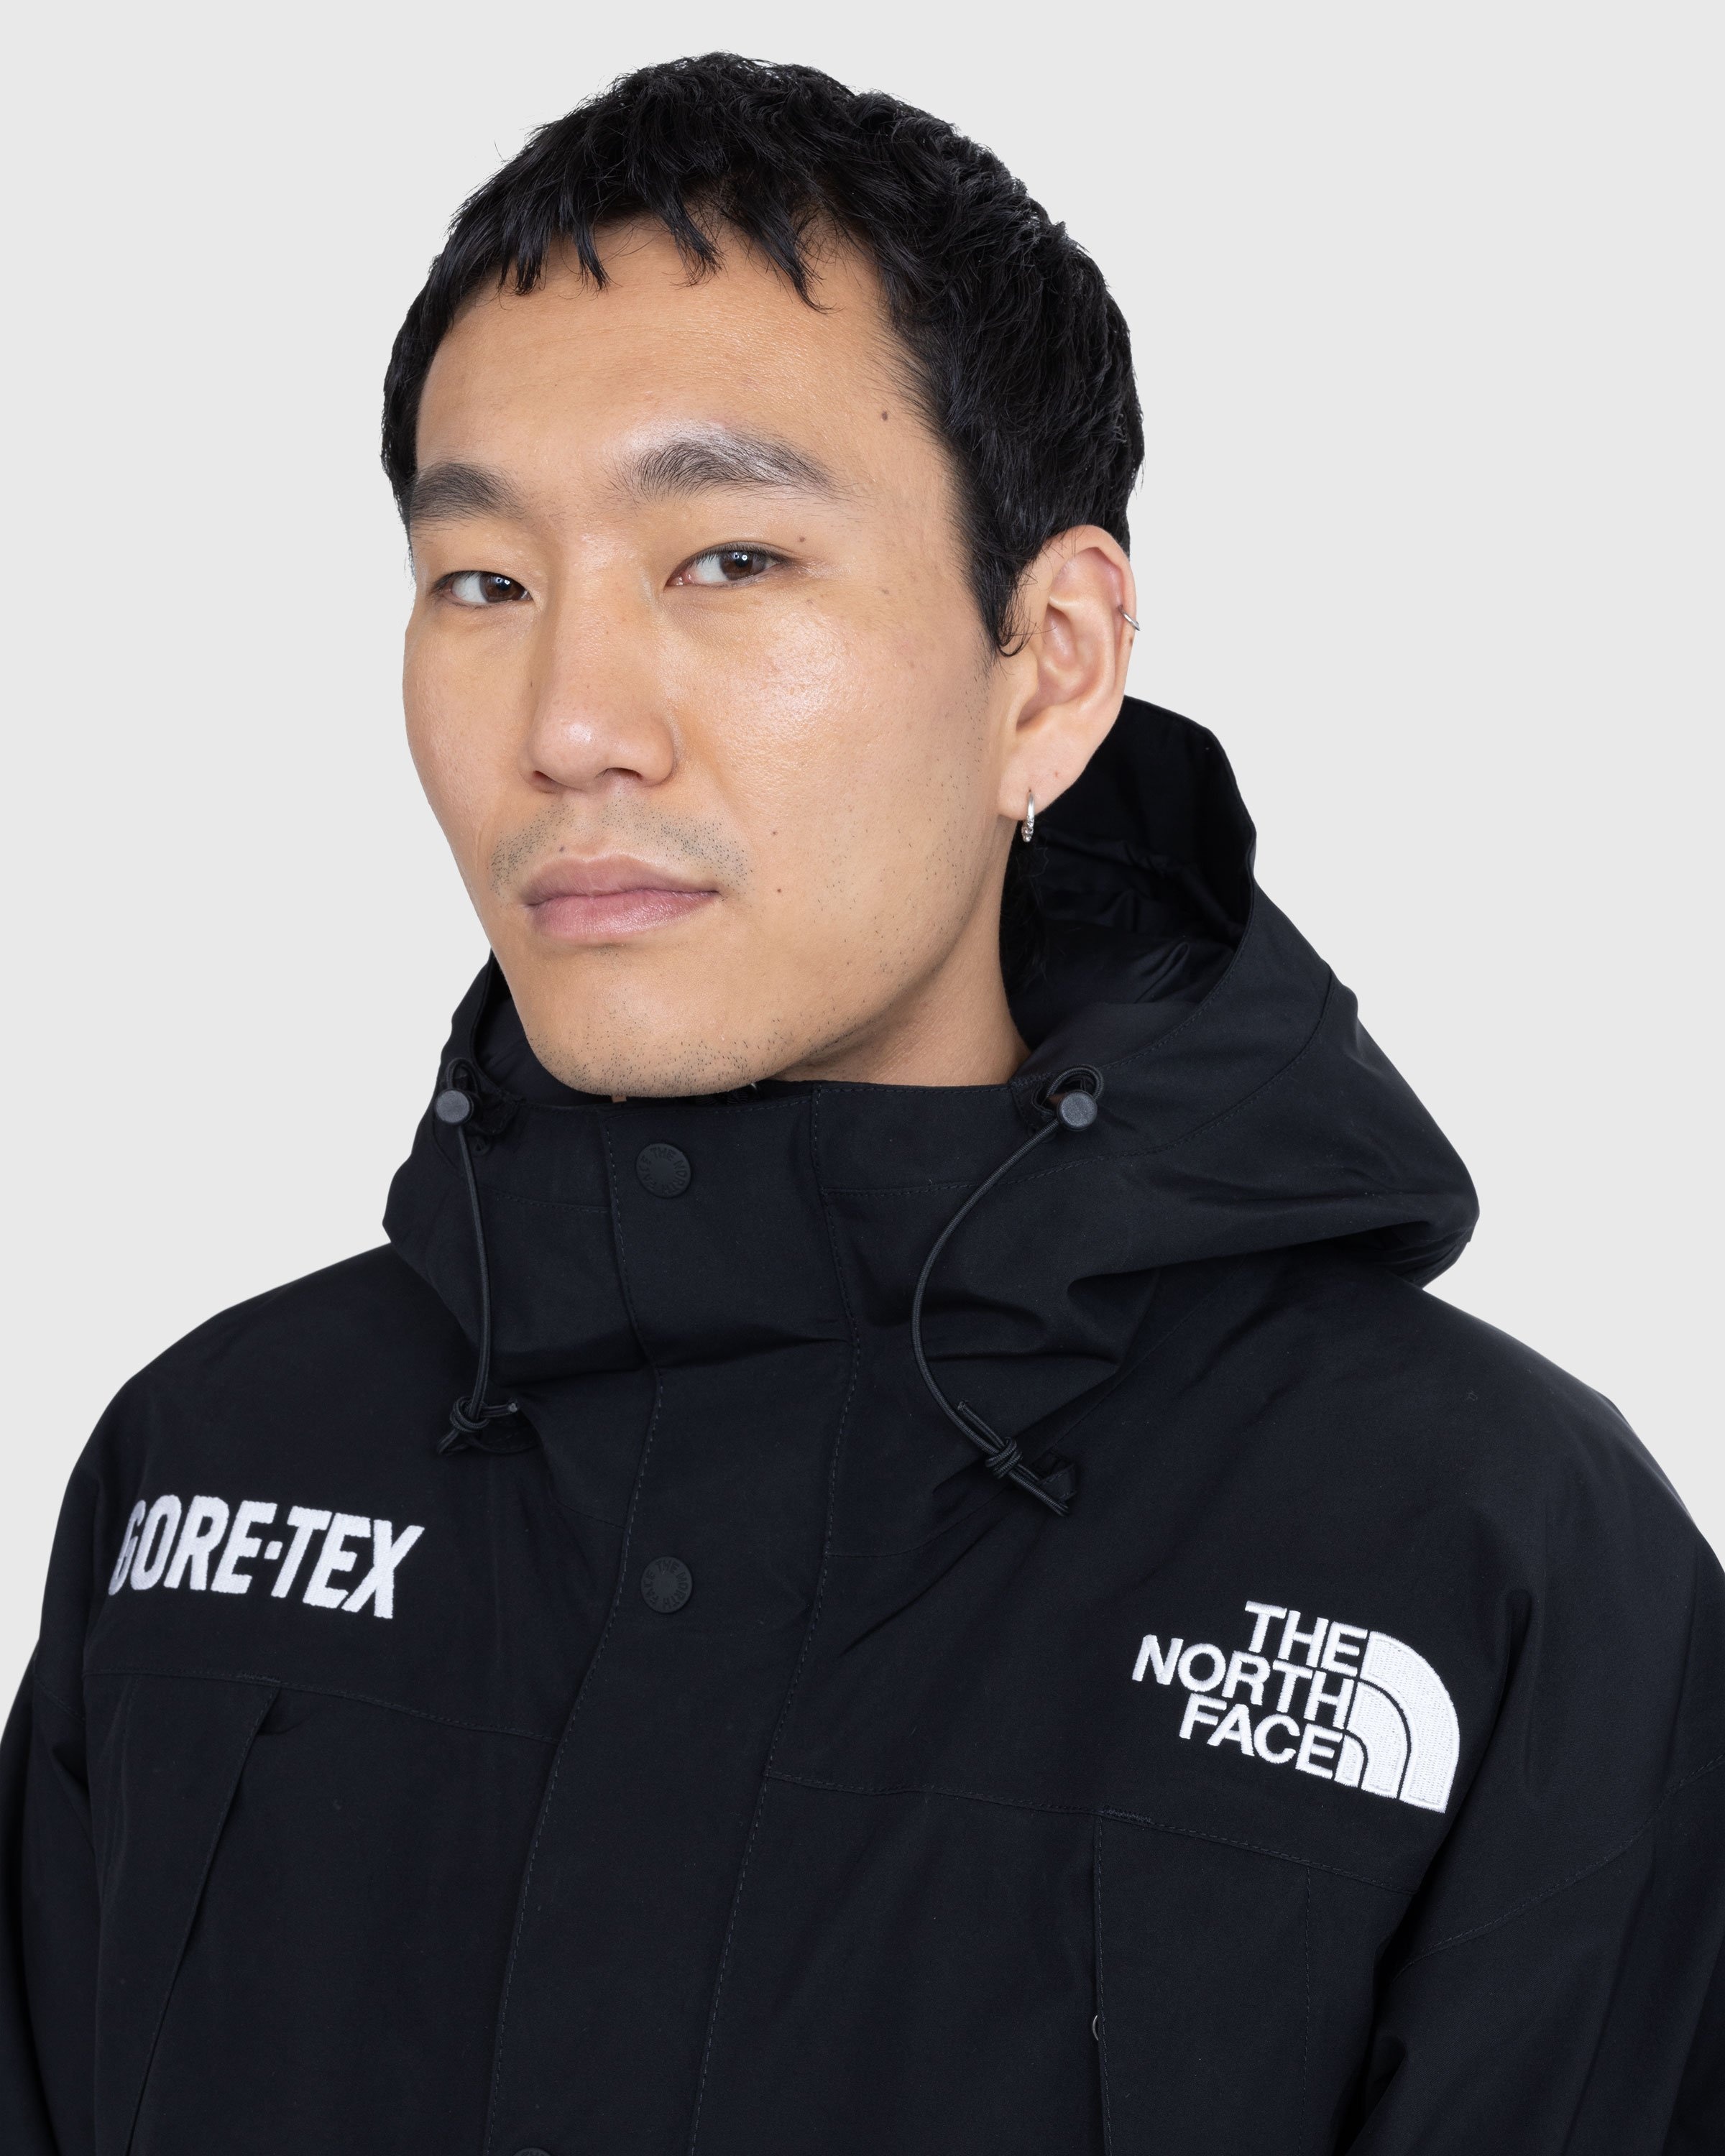 The North Face – GORE-TEX Mountain Guide Insulated Jacket Black